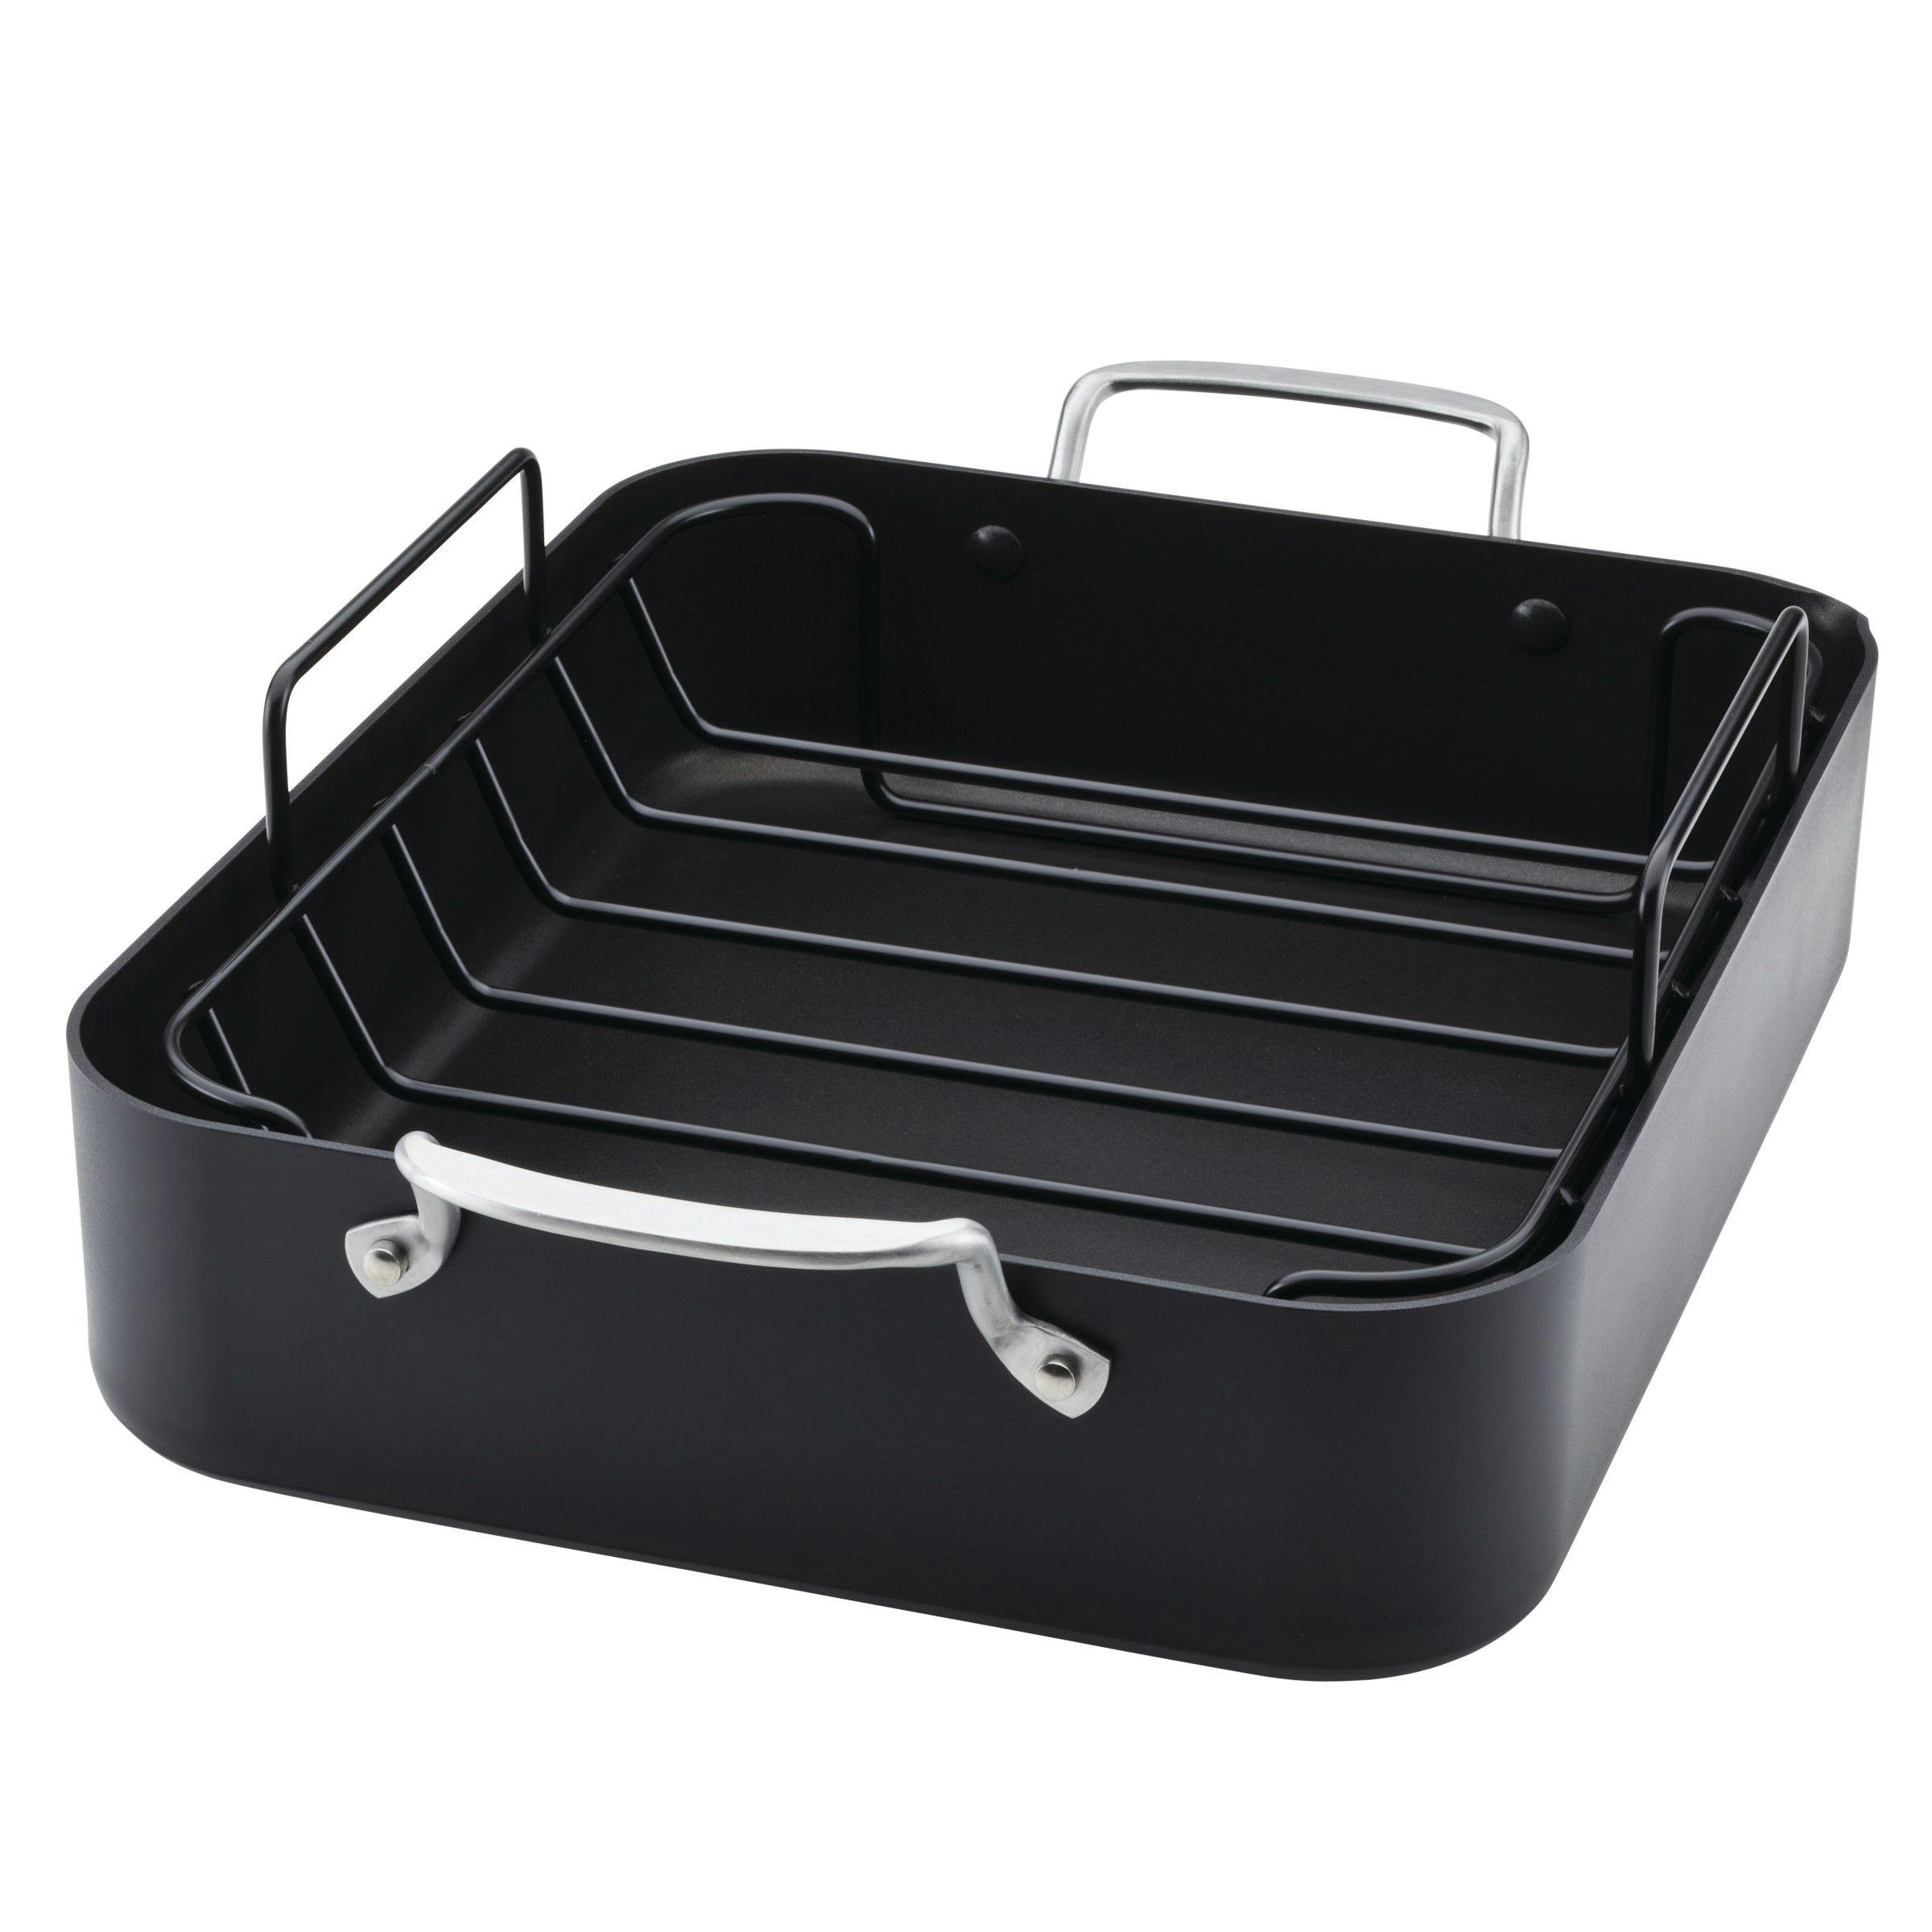 KitchenAid Hard Anodized Roaster with Removable Nonstick Rack, 13-Inch x 15.75-Inch, Matte Black